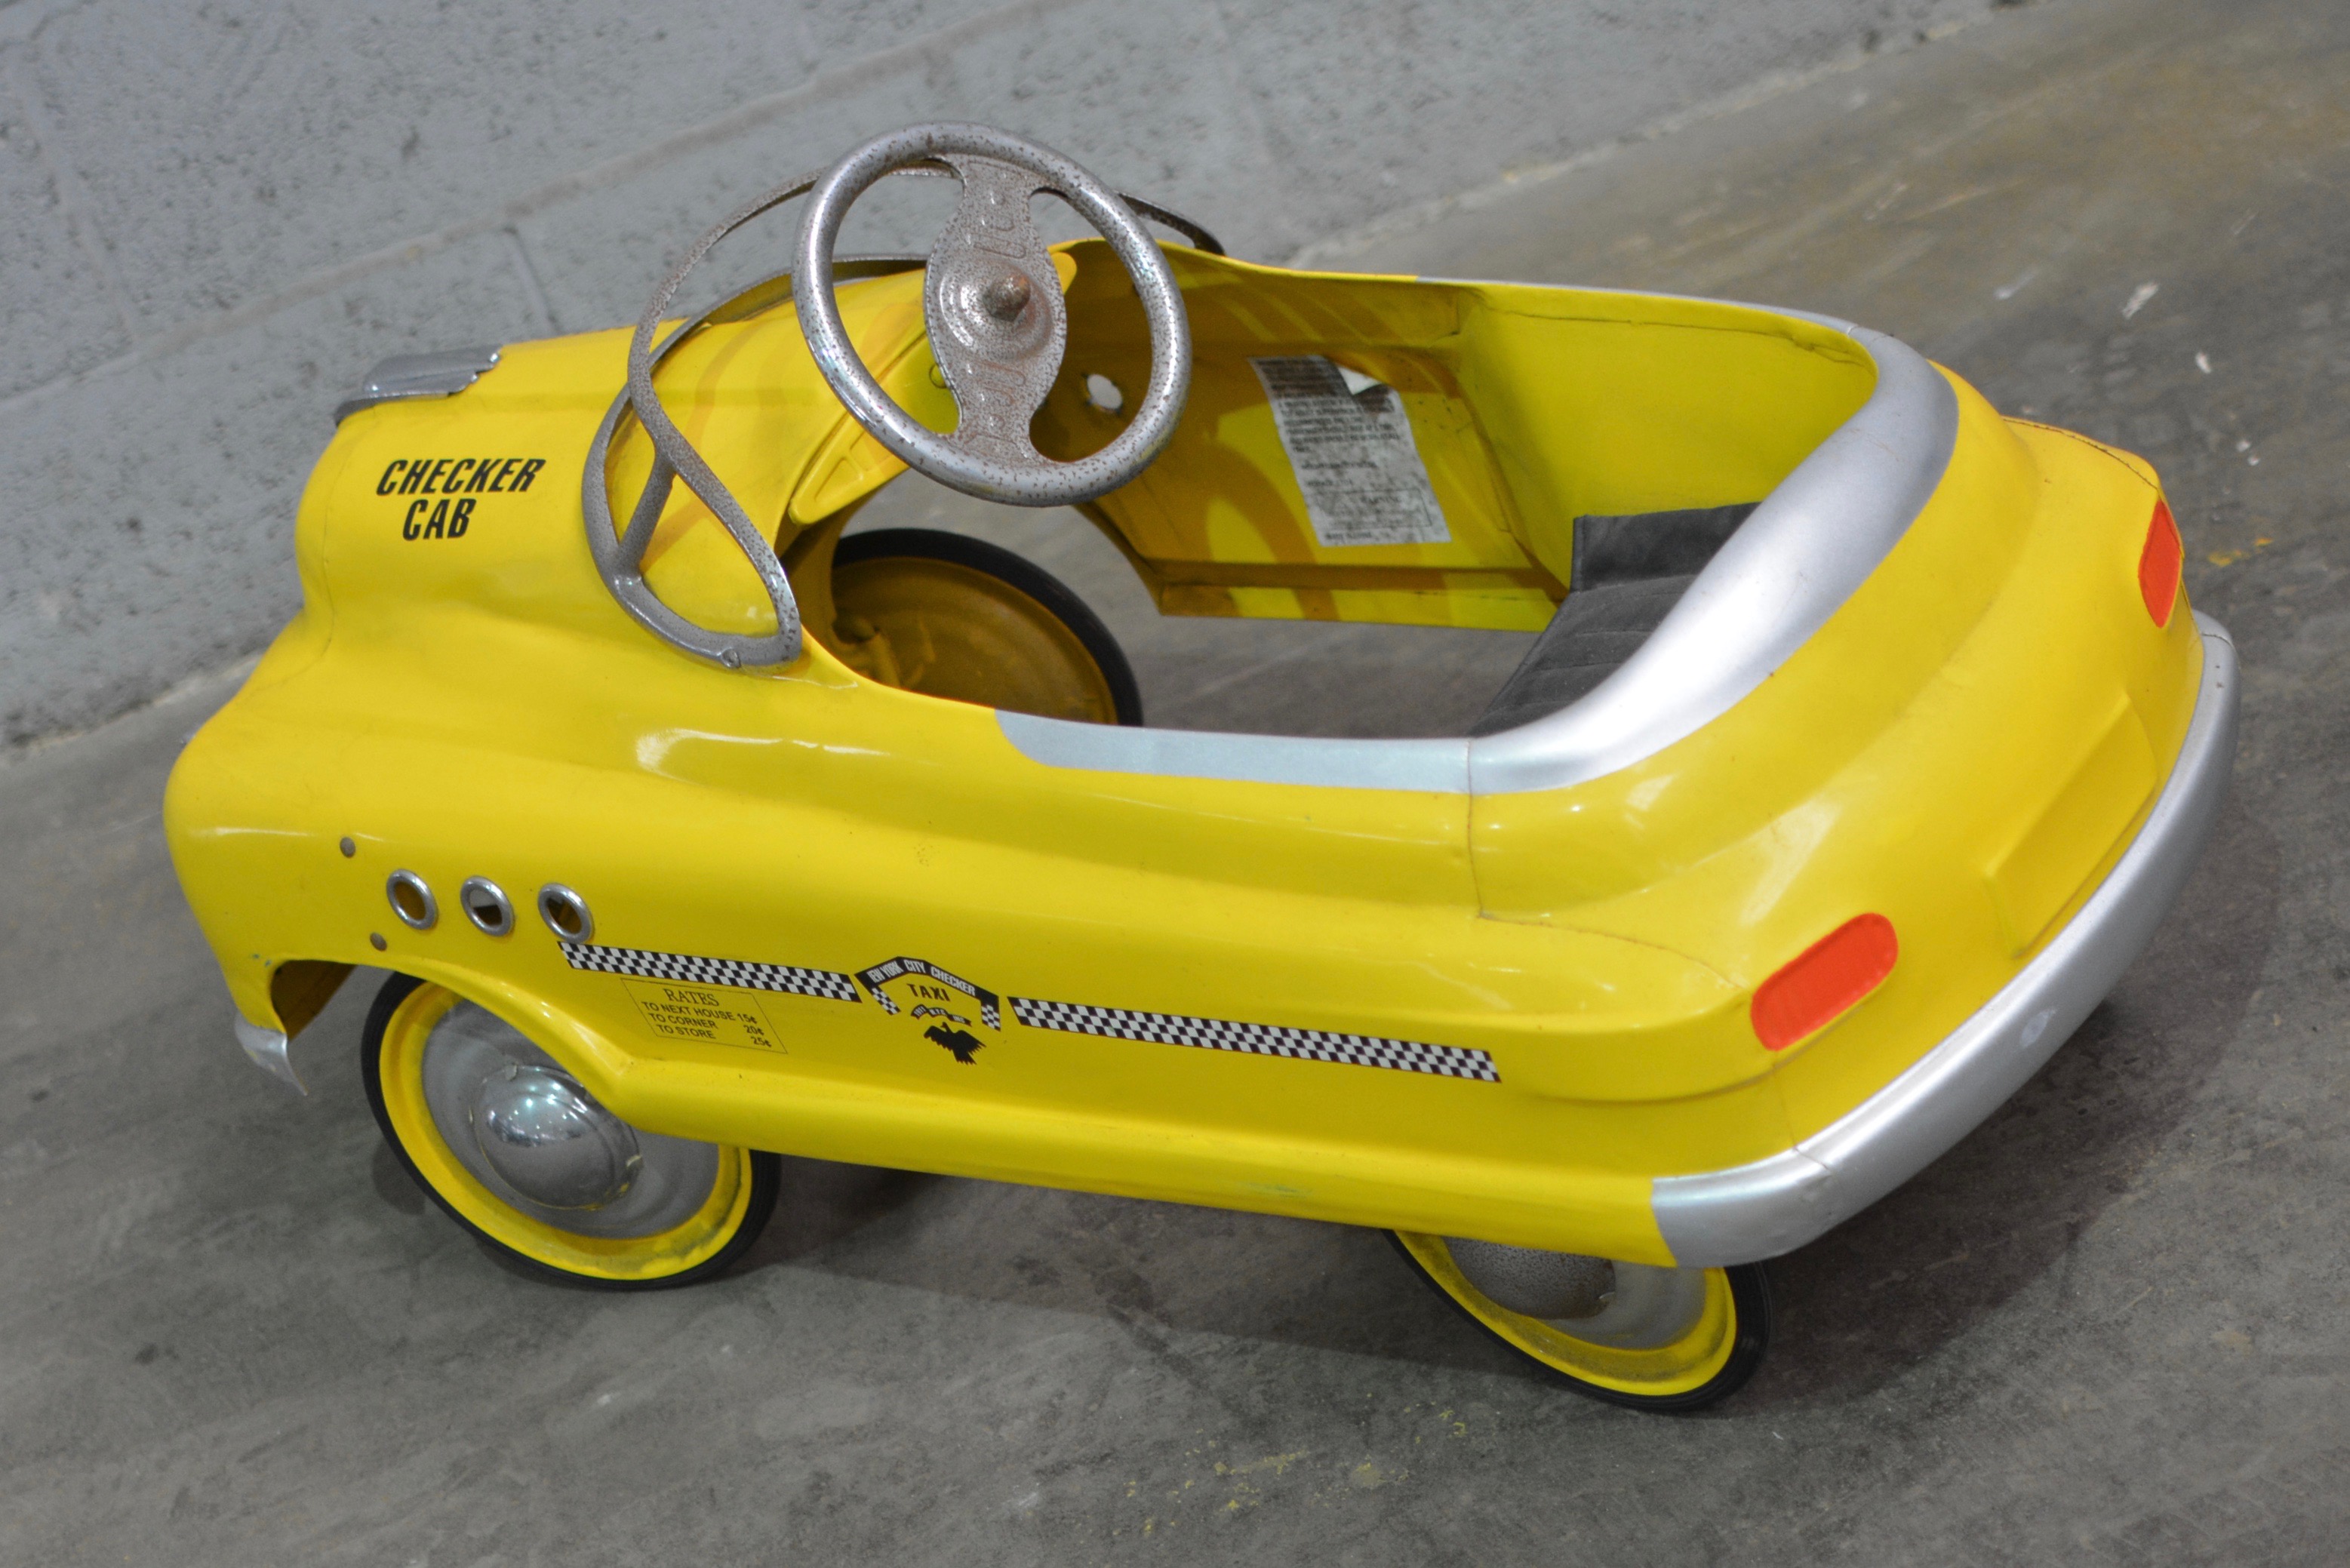 Nearly 150 pedal cars will cross Brightwells auction block | ClassicCars